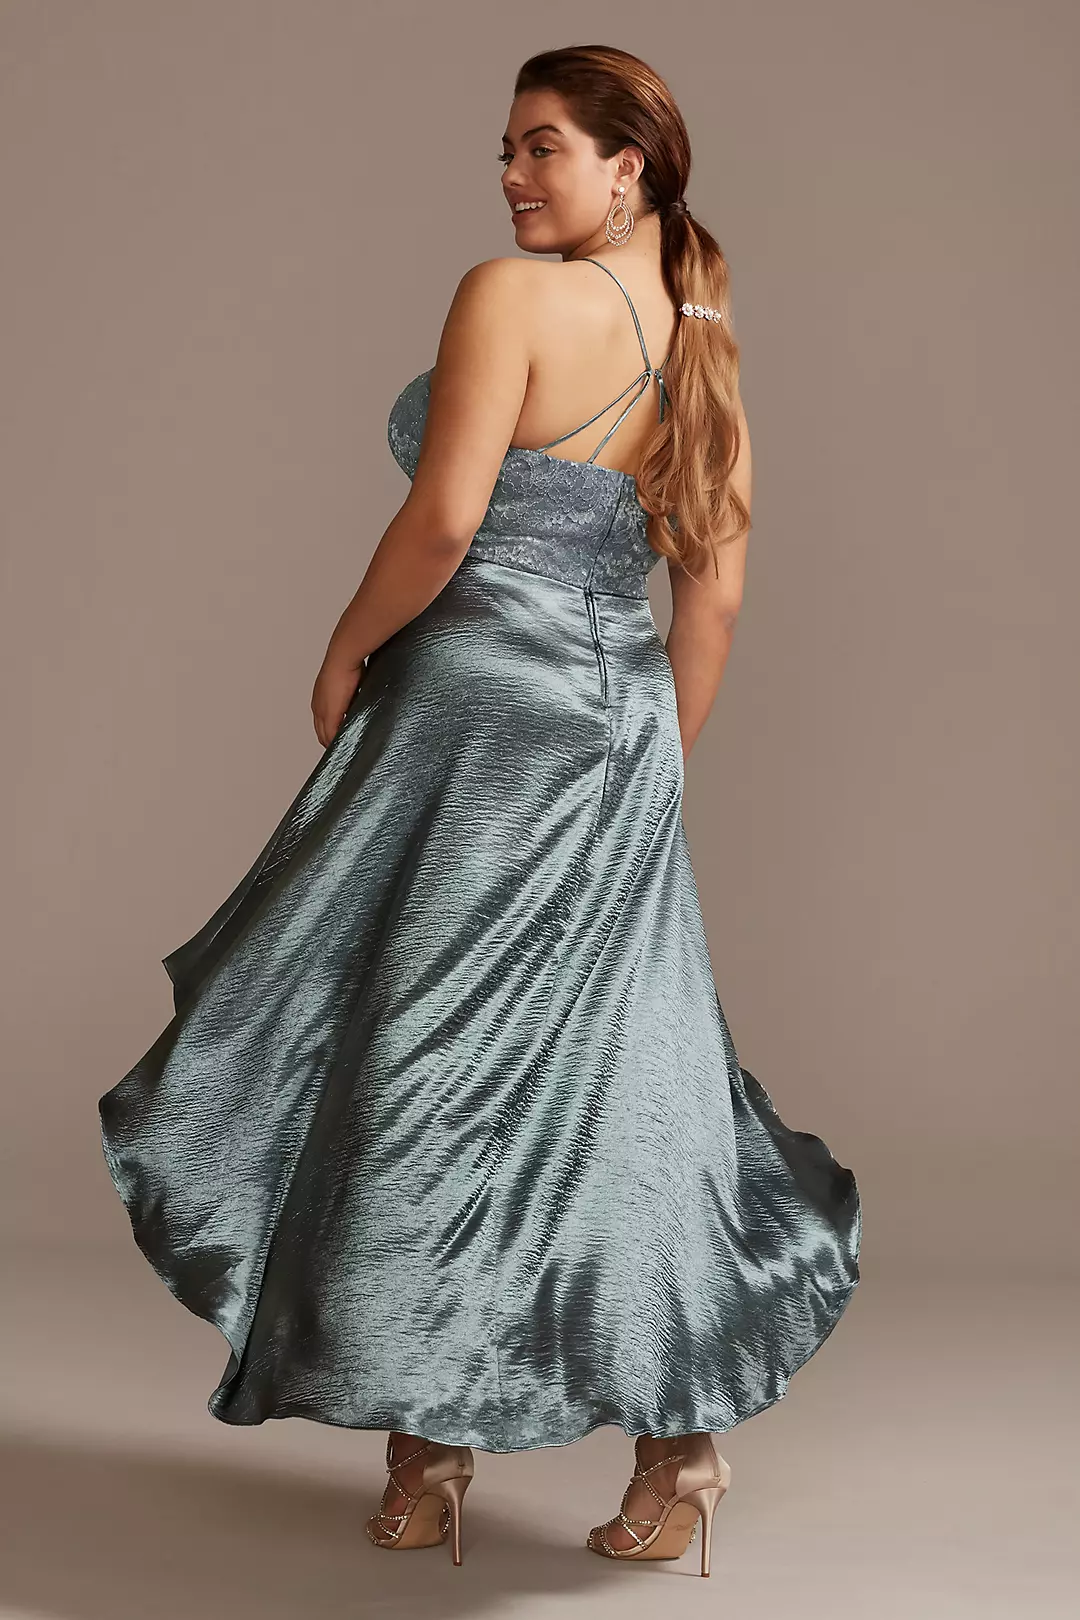 Lace and Brushed Satin High Low Strappy Dress Image 2